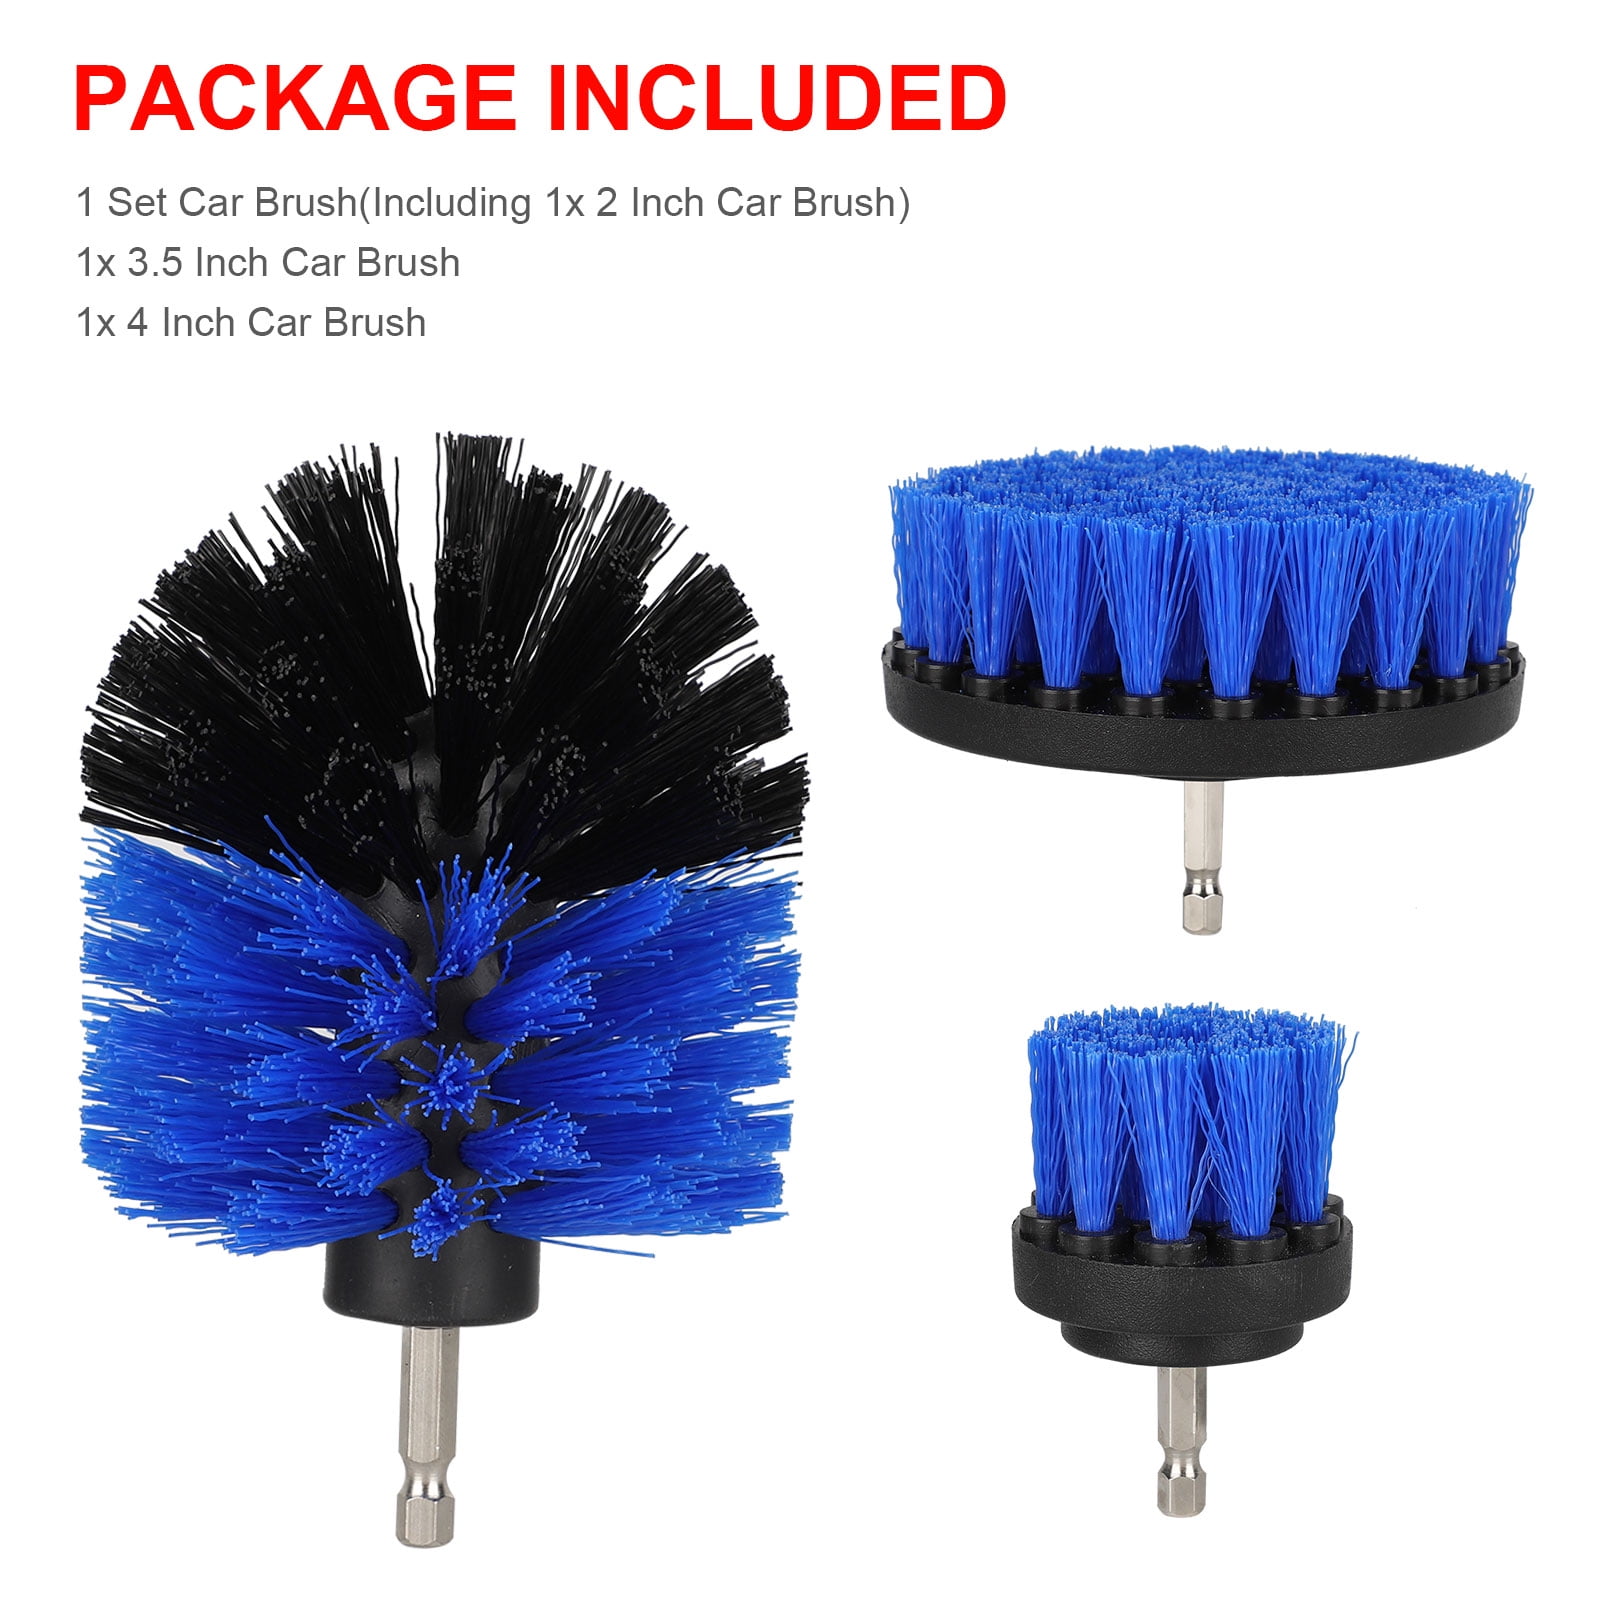 Drill Brush Set 3/8/12 pc Tile Grout Power Scrubber Cleaner Spin Tub Shower  Wall - Redstag Supplies